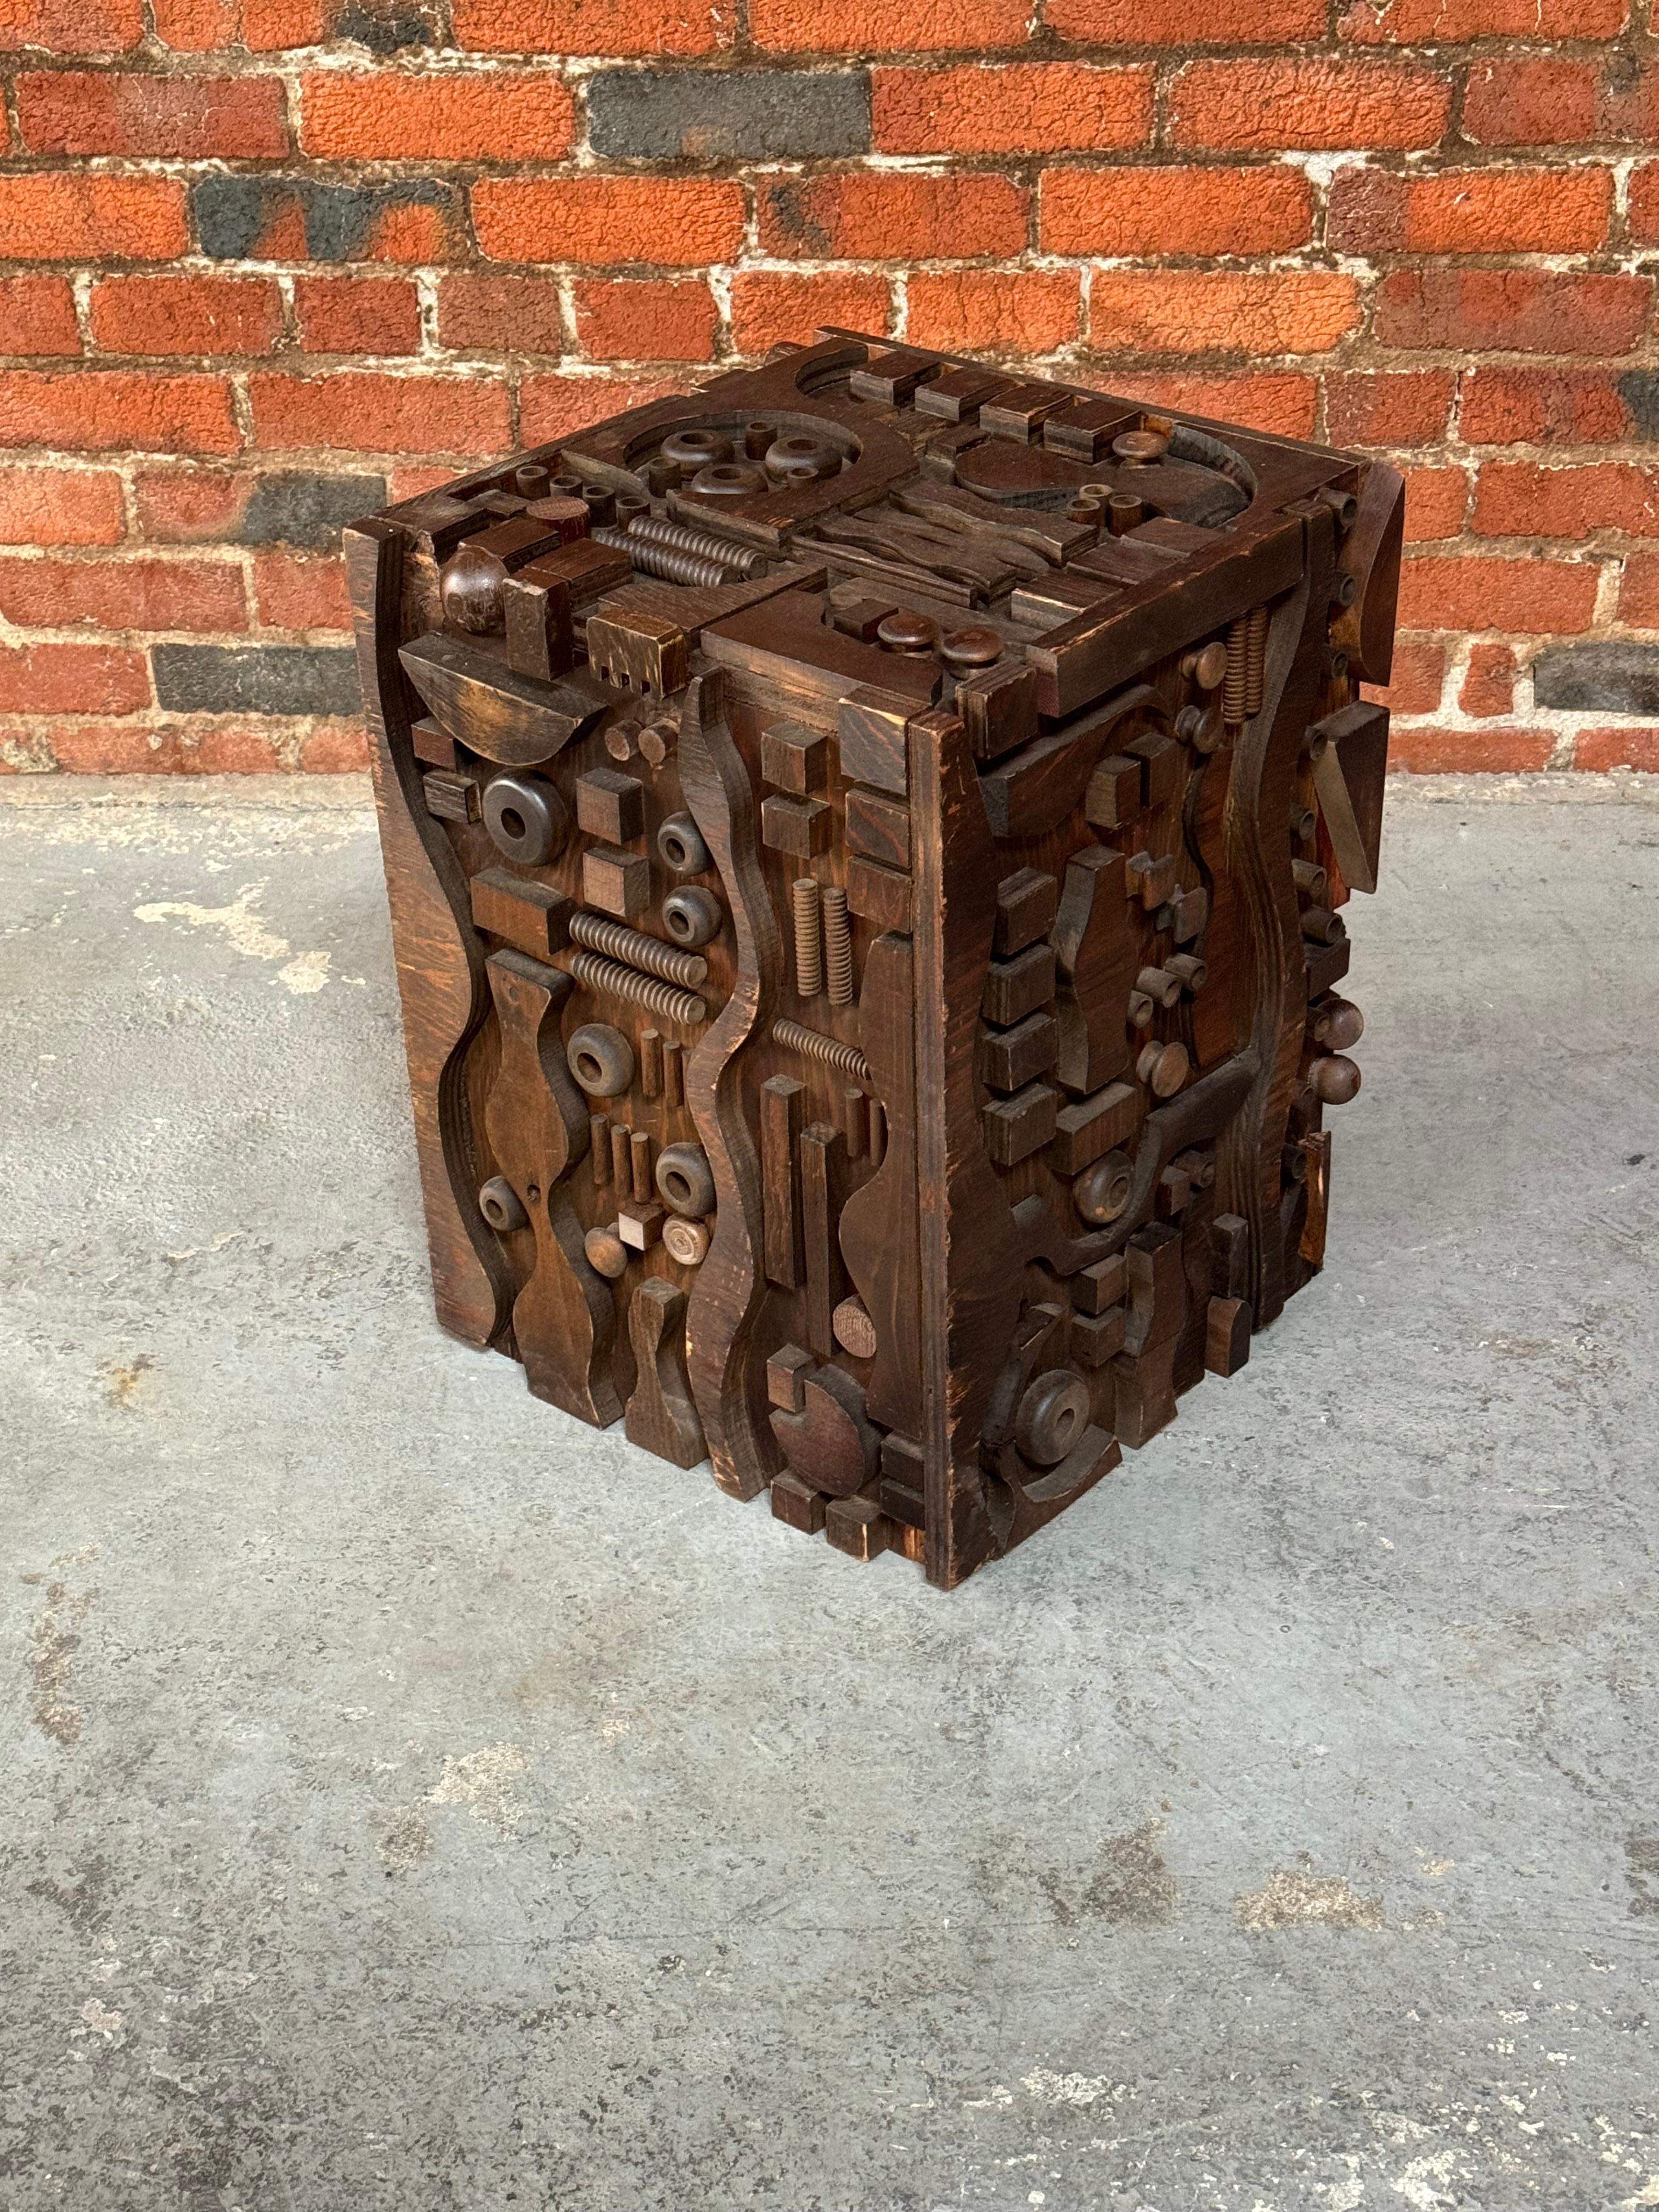 A Pacific Northwest creation circa 1970s to 1980s, plywood side table / sculpture, having various abstract designs attached to the exterior of the table / sculpture and finished with a dark brown stain.